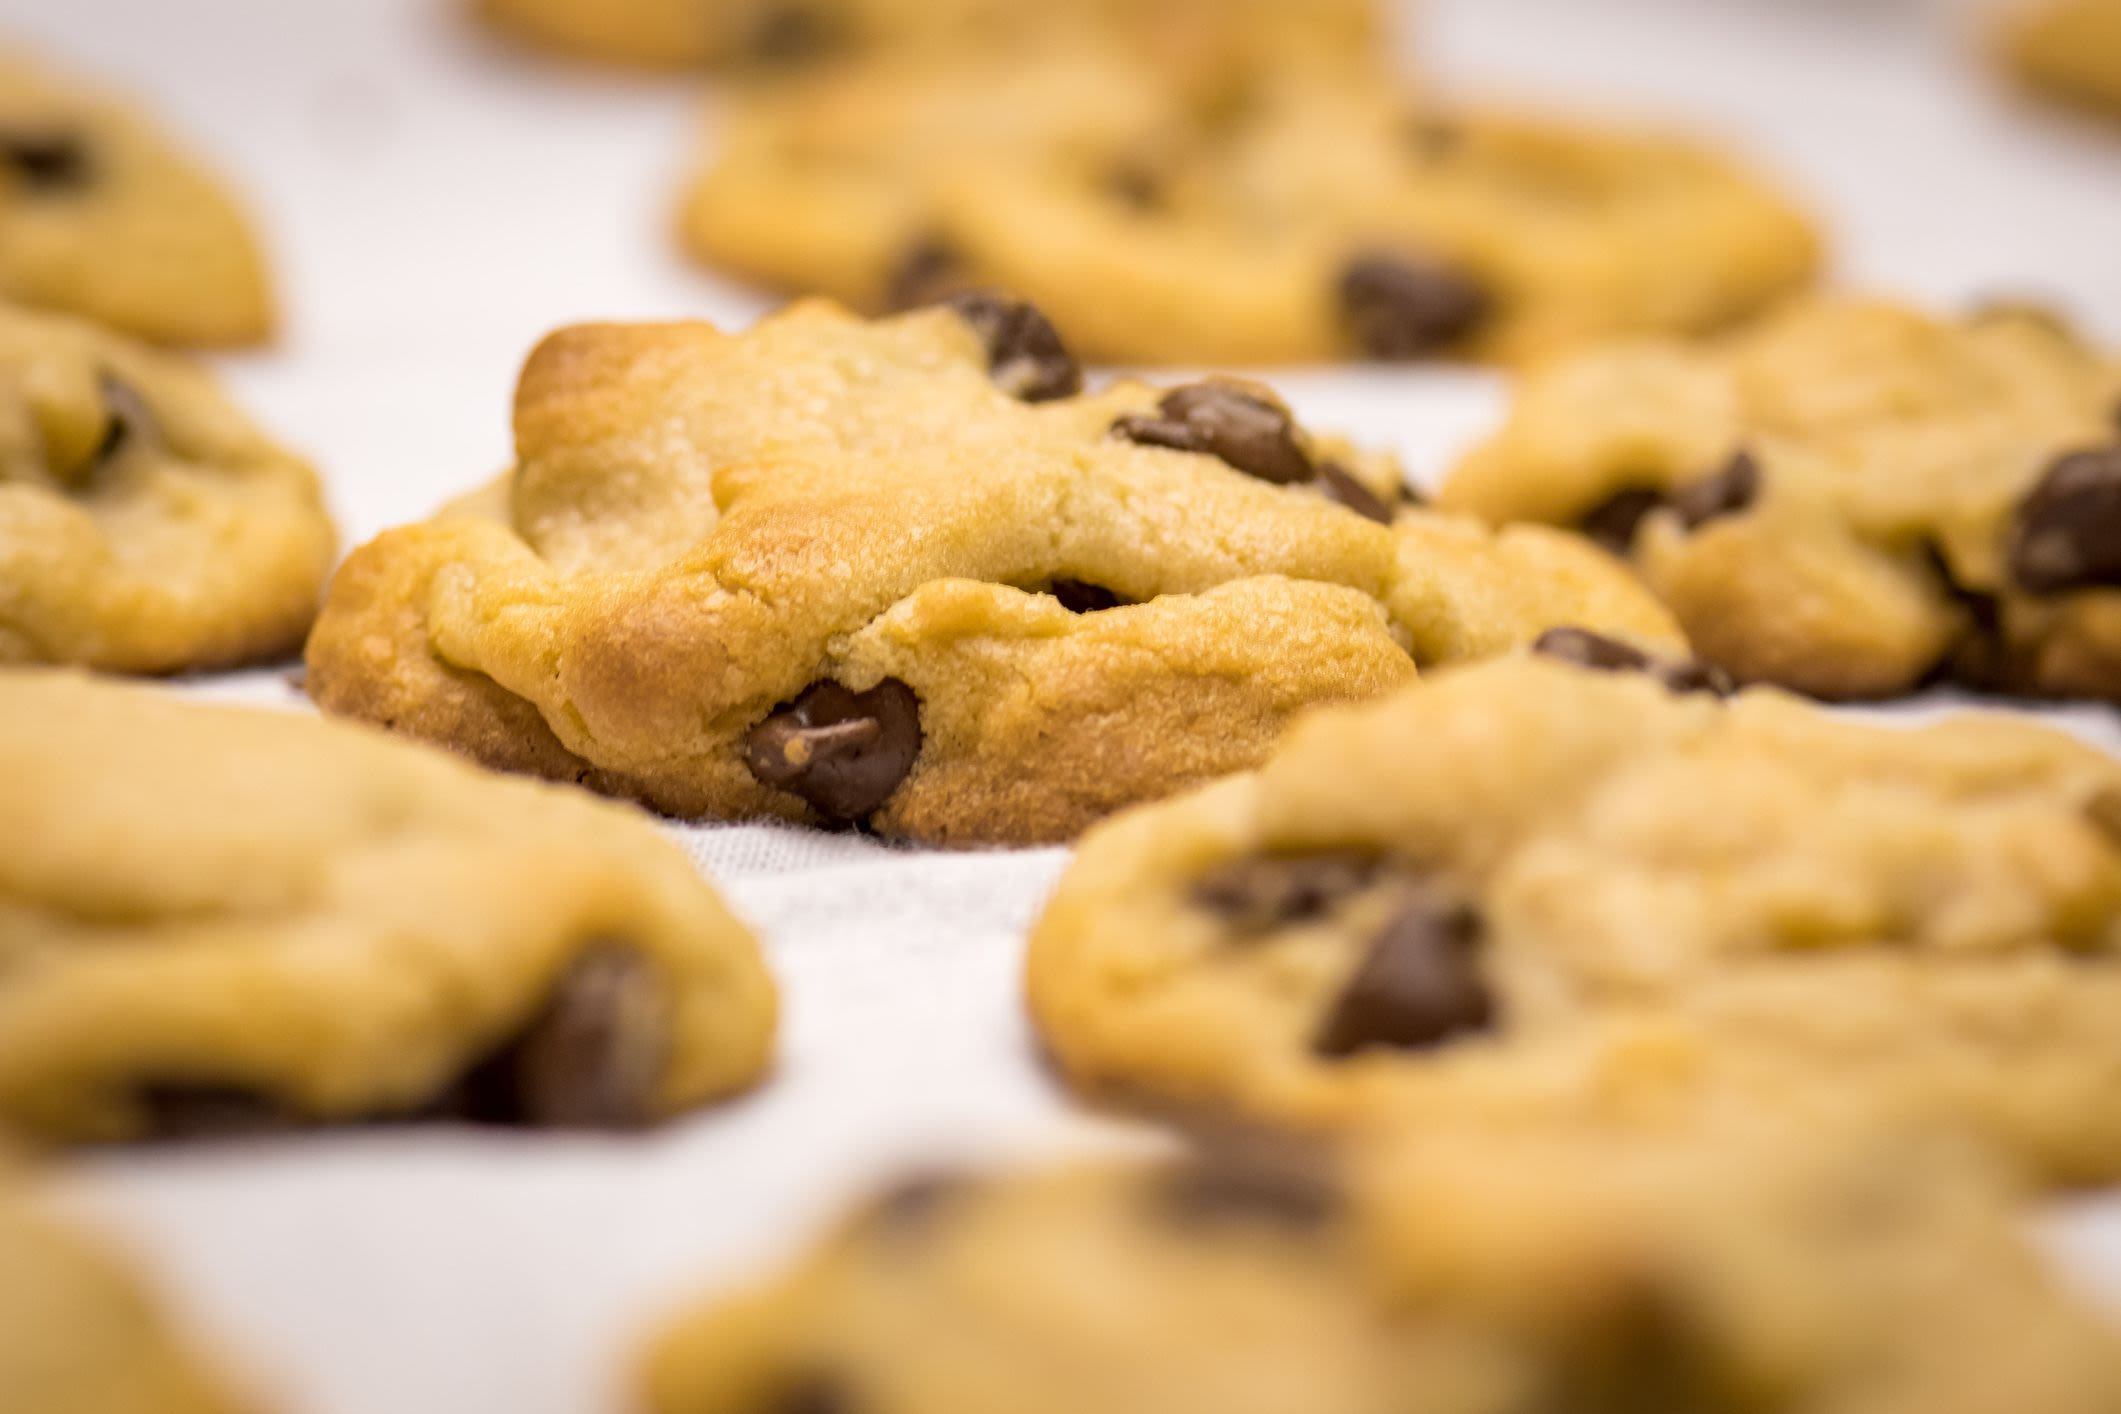 Stop What You're Doing and Make One of These Chocolate Chip Cookie Recipes Right Now